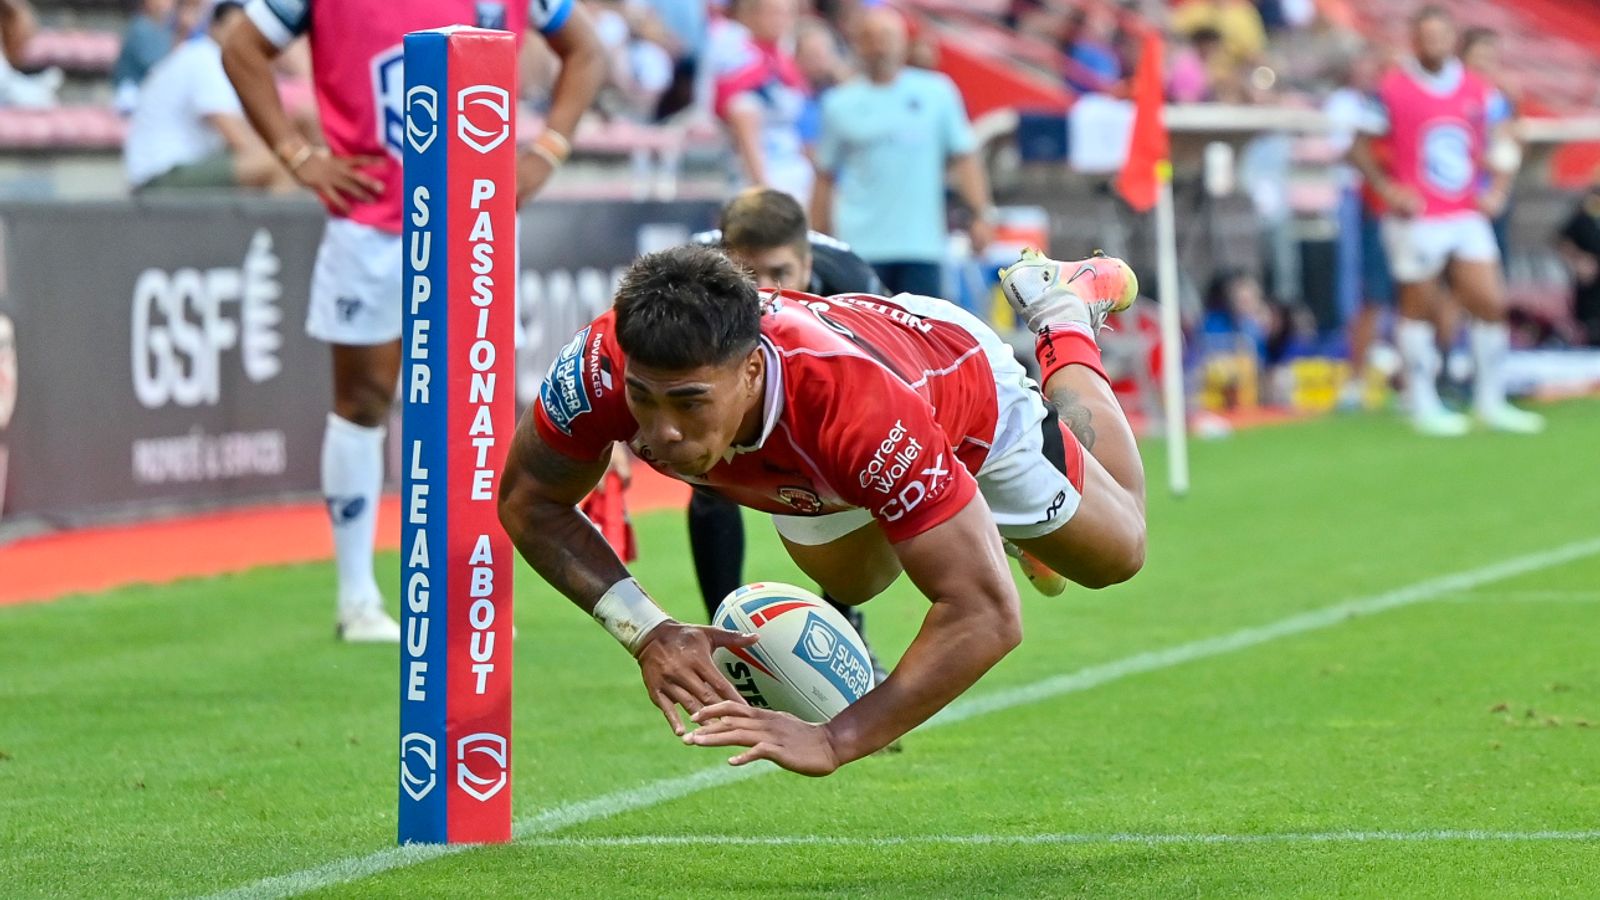 Super League: Ken Sio and Joe Burgess have Salford Red Devils rising at Toulouse Olympique